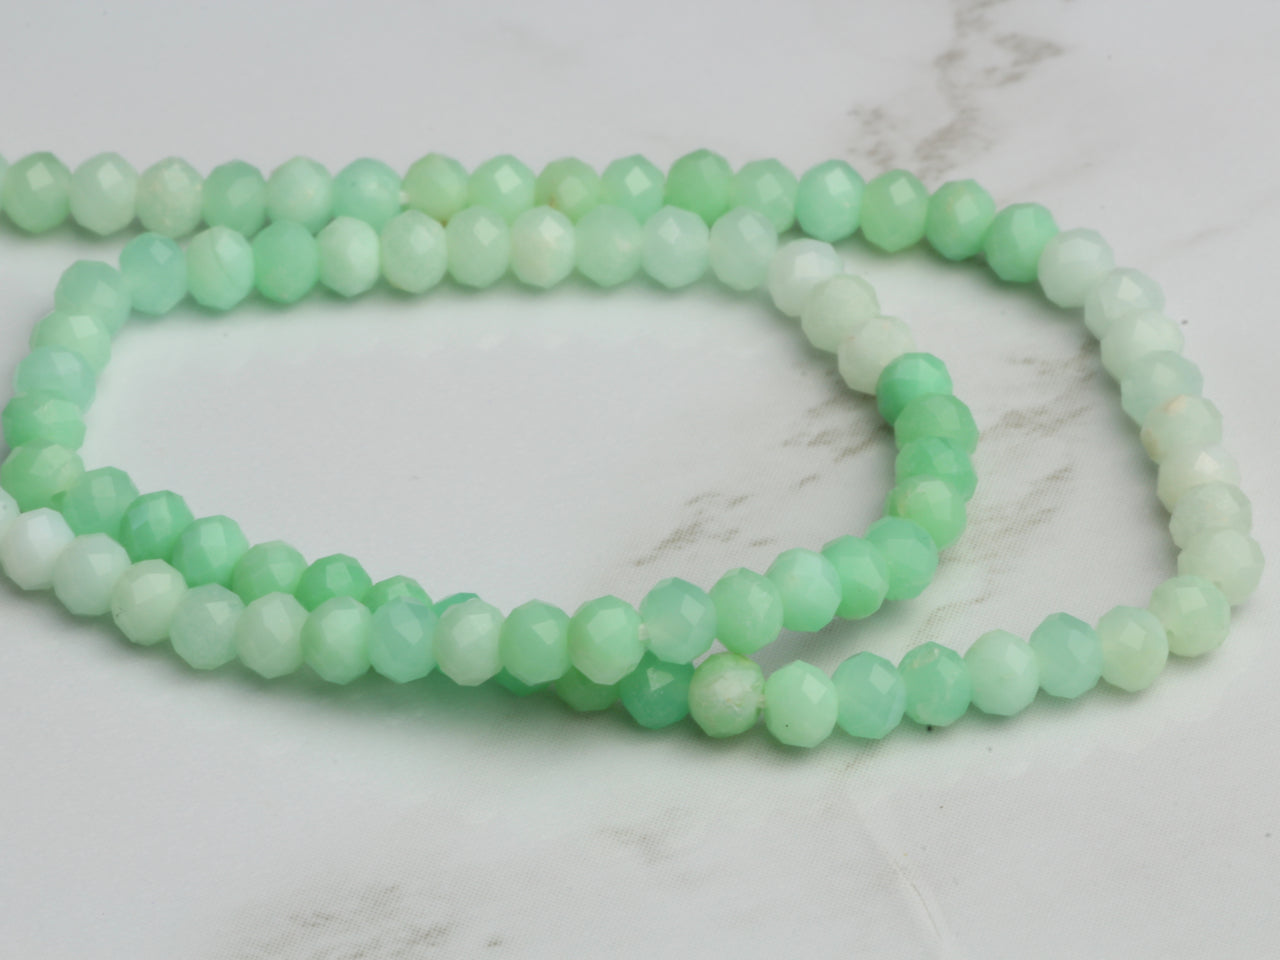 Ombre Green and White Chrysoprase 3mm Faceted Rondelles